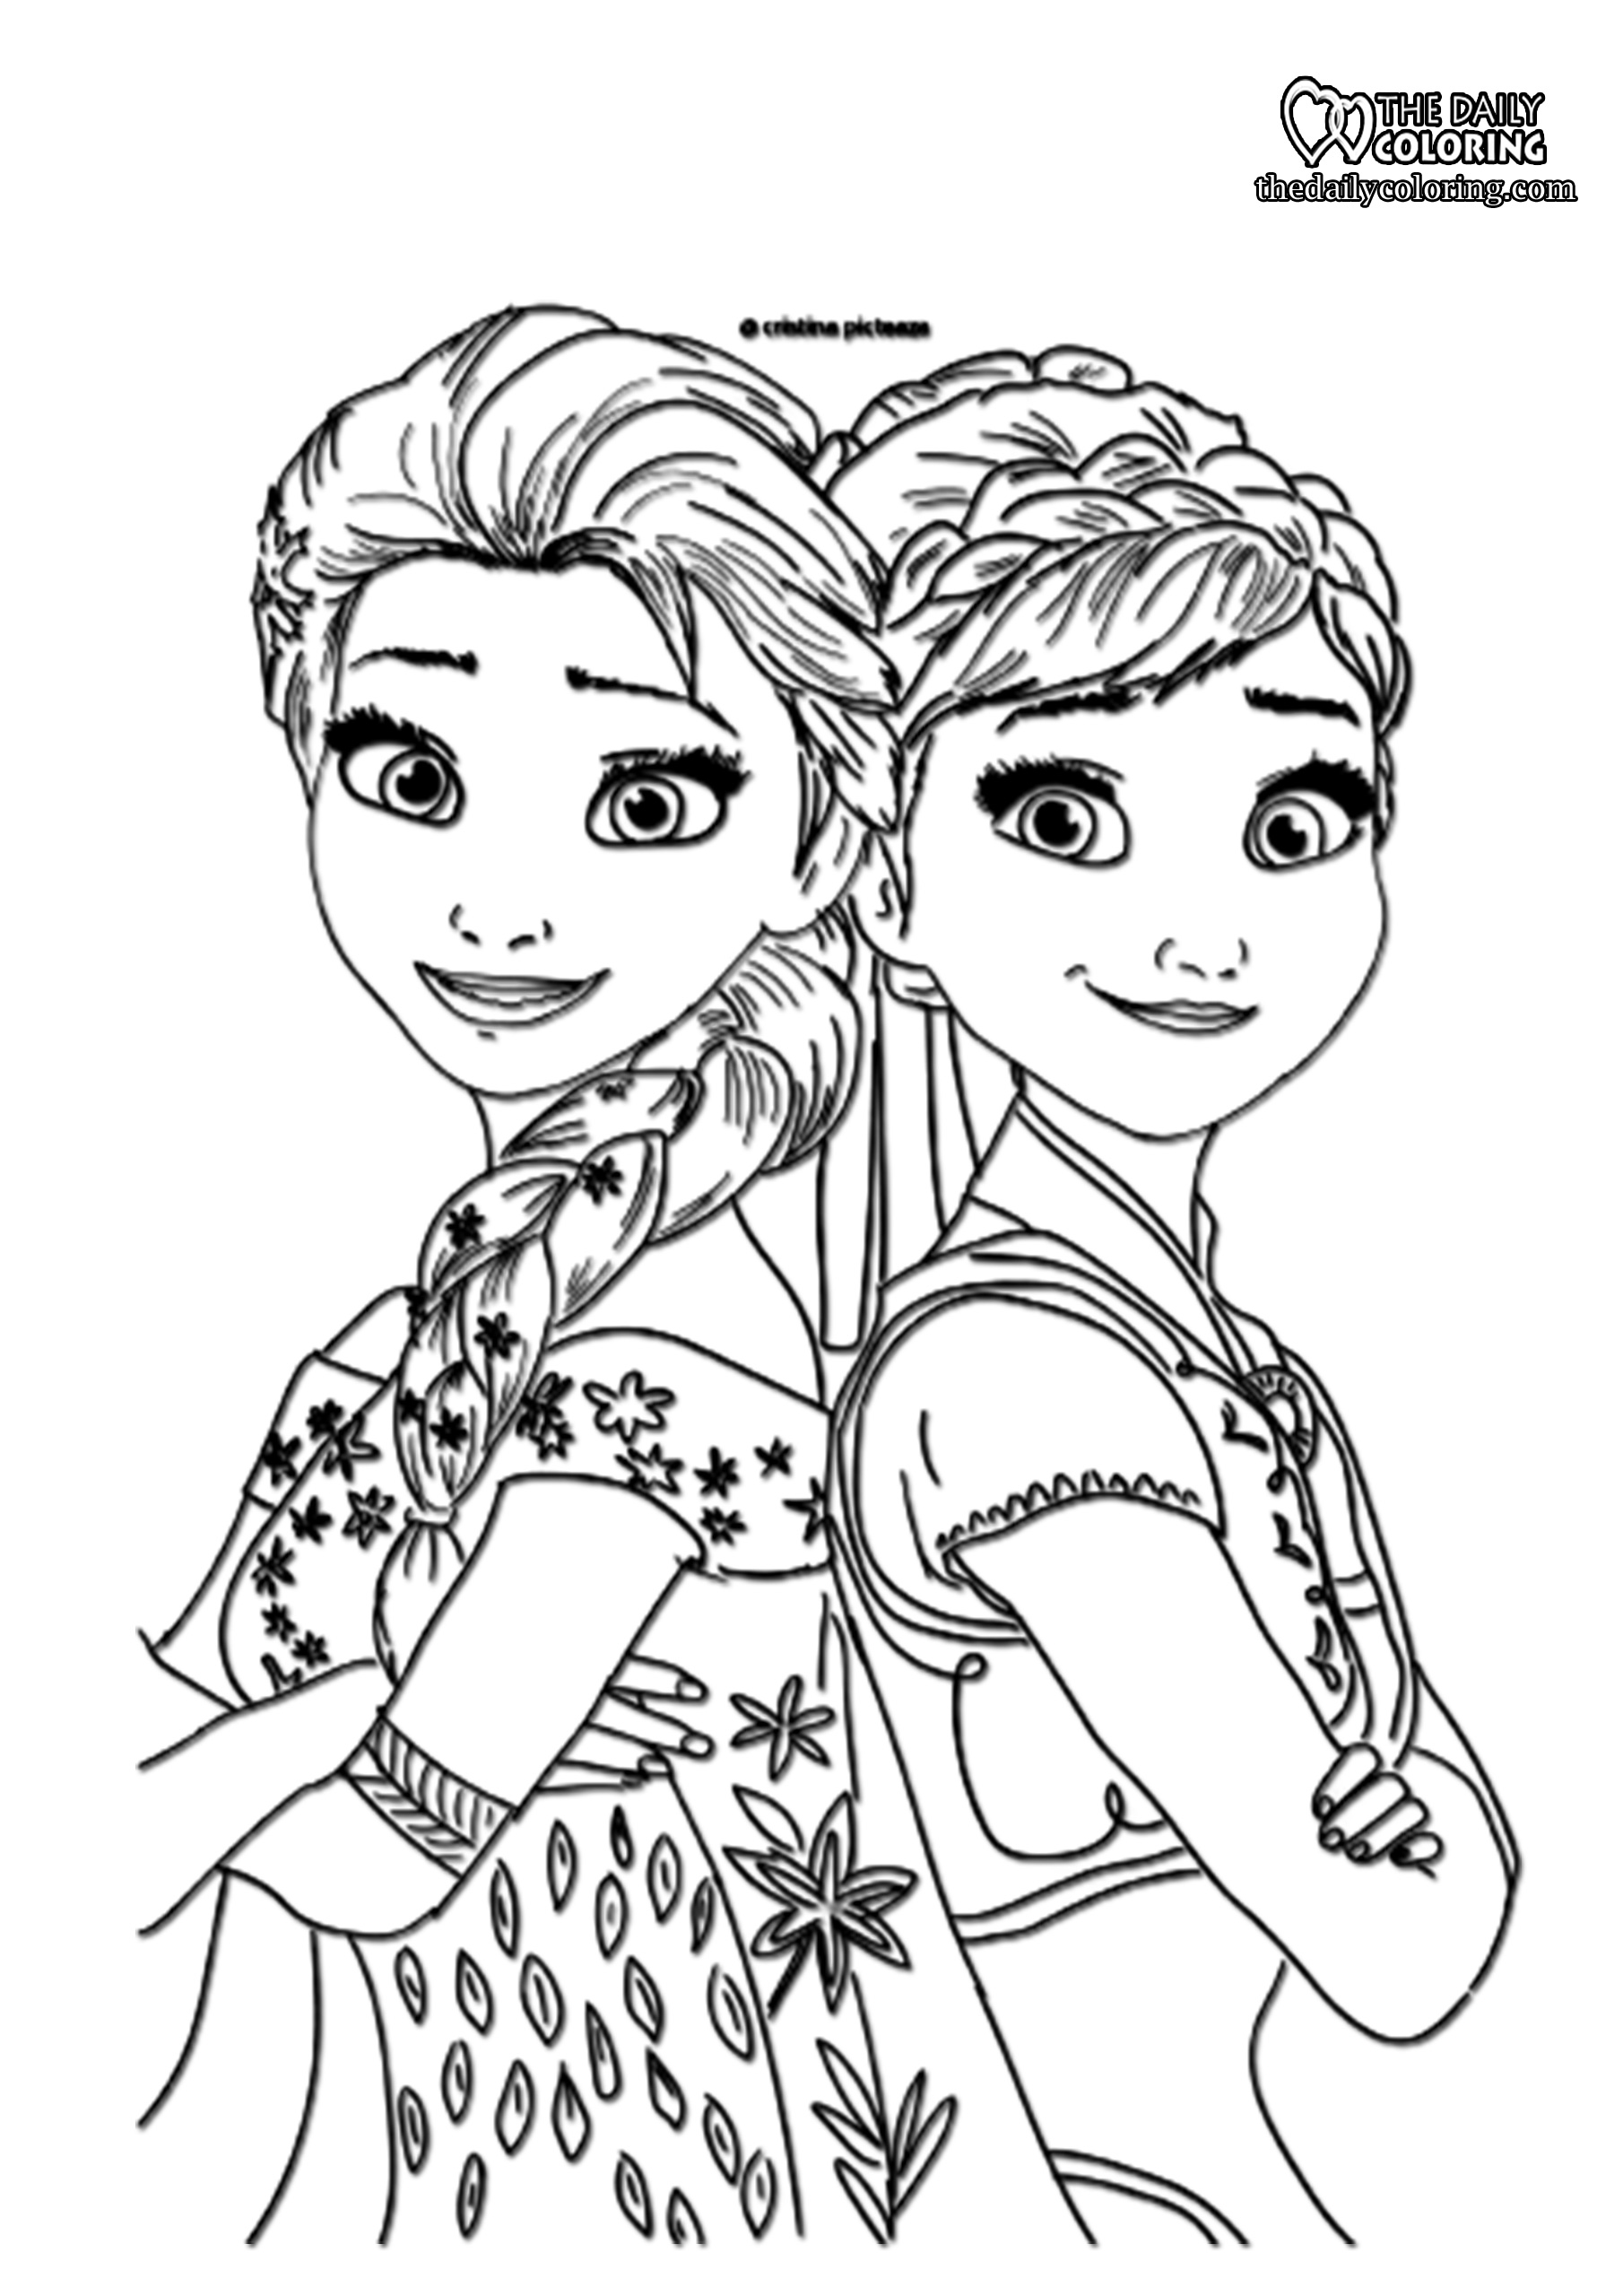 Elsa and Anna Coloring Pages [9 Pages] The Daily Coloring